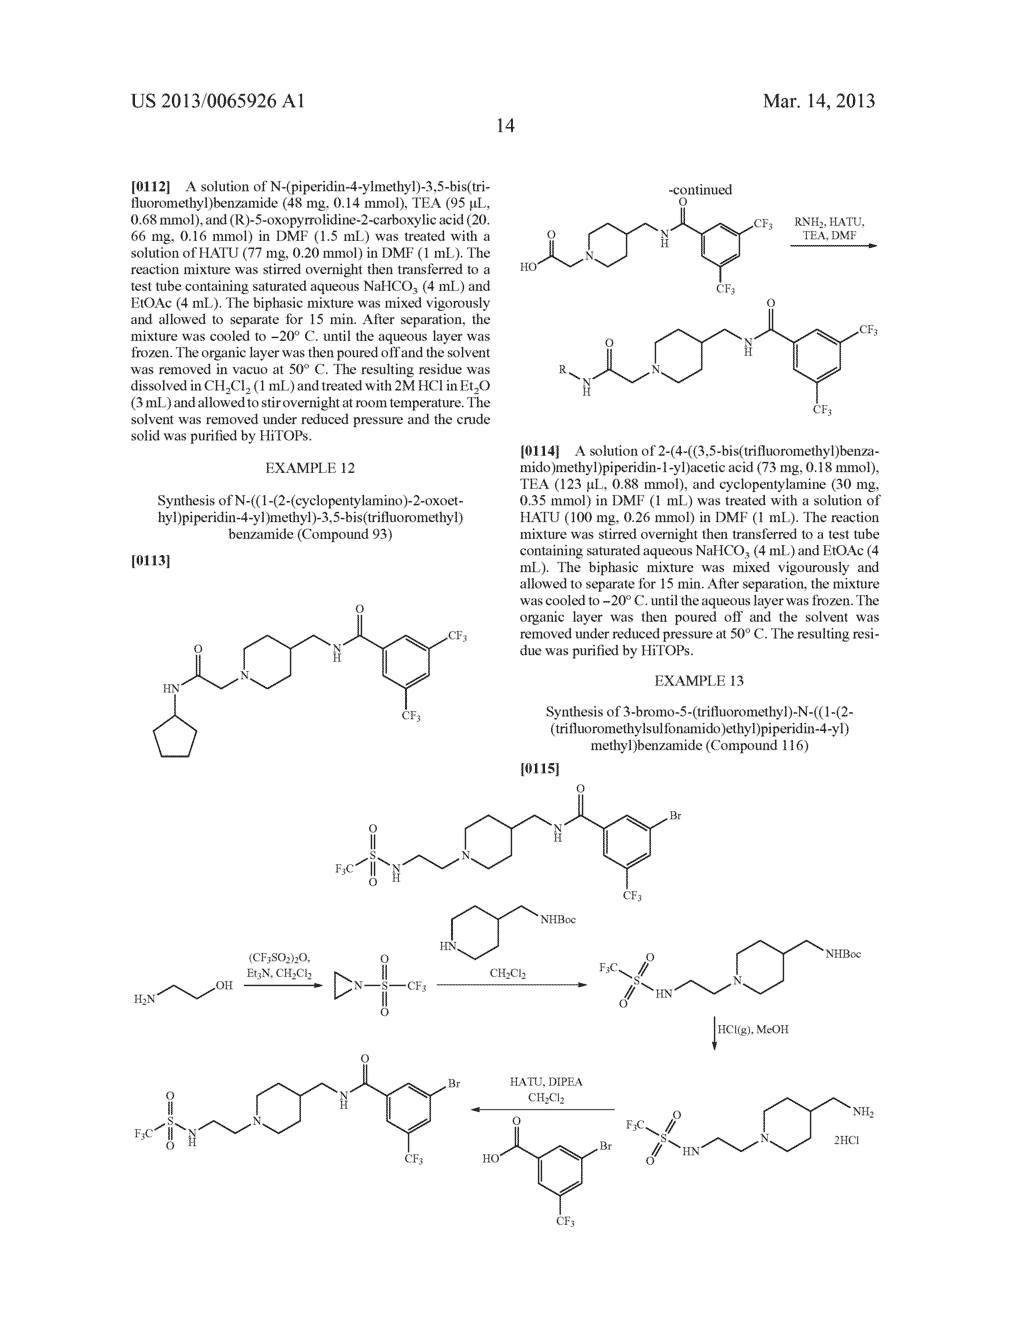 N-PIPERIDINYL ACETAMIDE DERIVATIVES AS CALCIUM CHANNEL BLOCKERS - diagram, schematic, and image 15